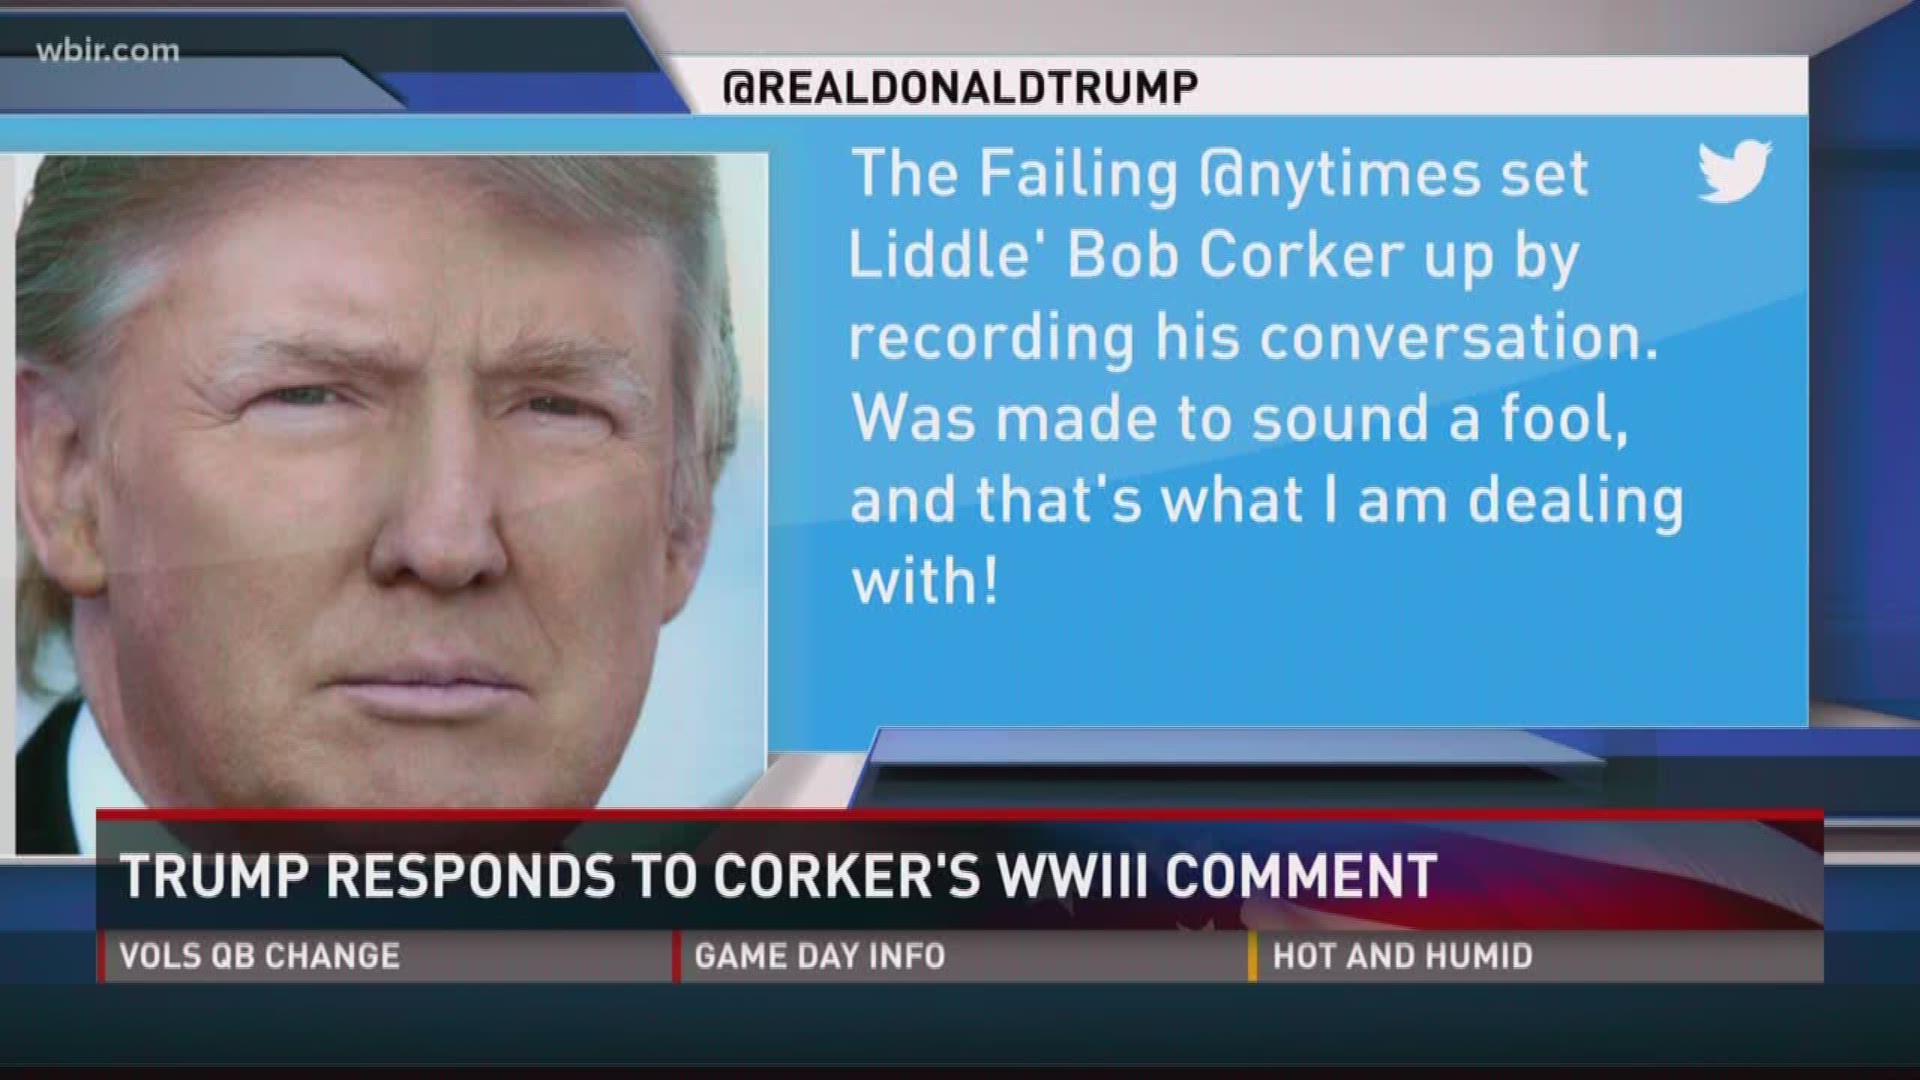 Oct. 10, 2017: President Donald Trump is not backing down on his criticism of Sen. Bob Corker.